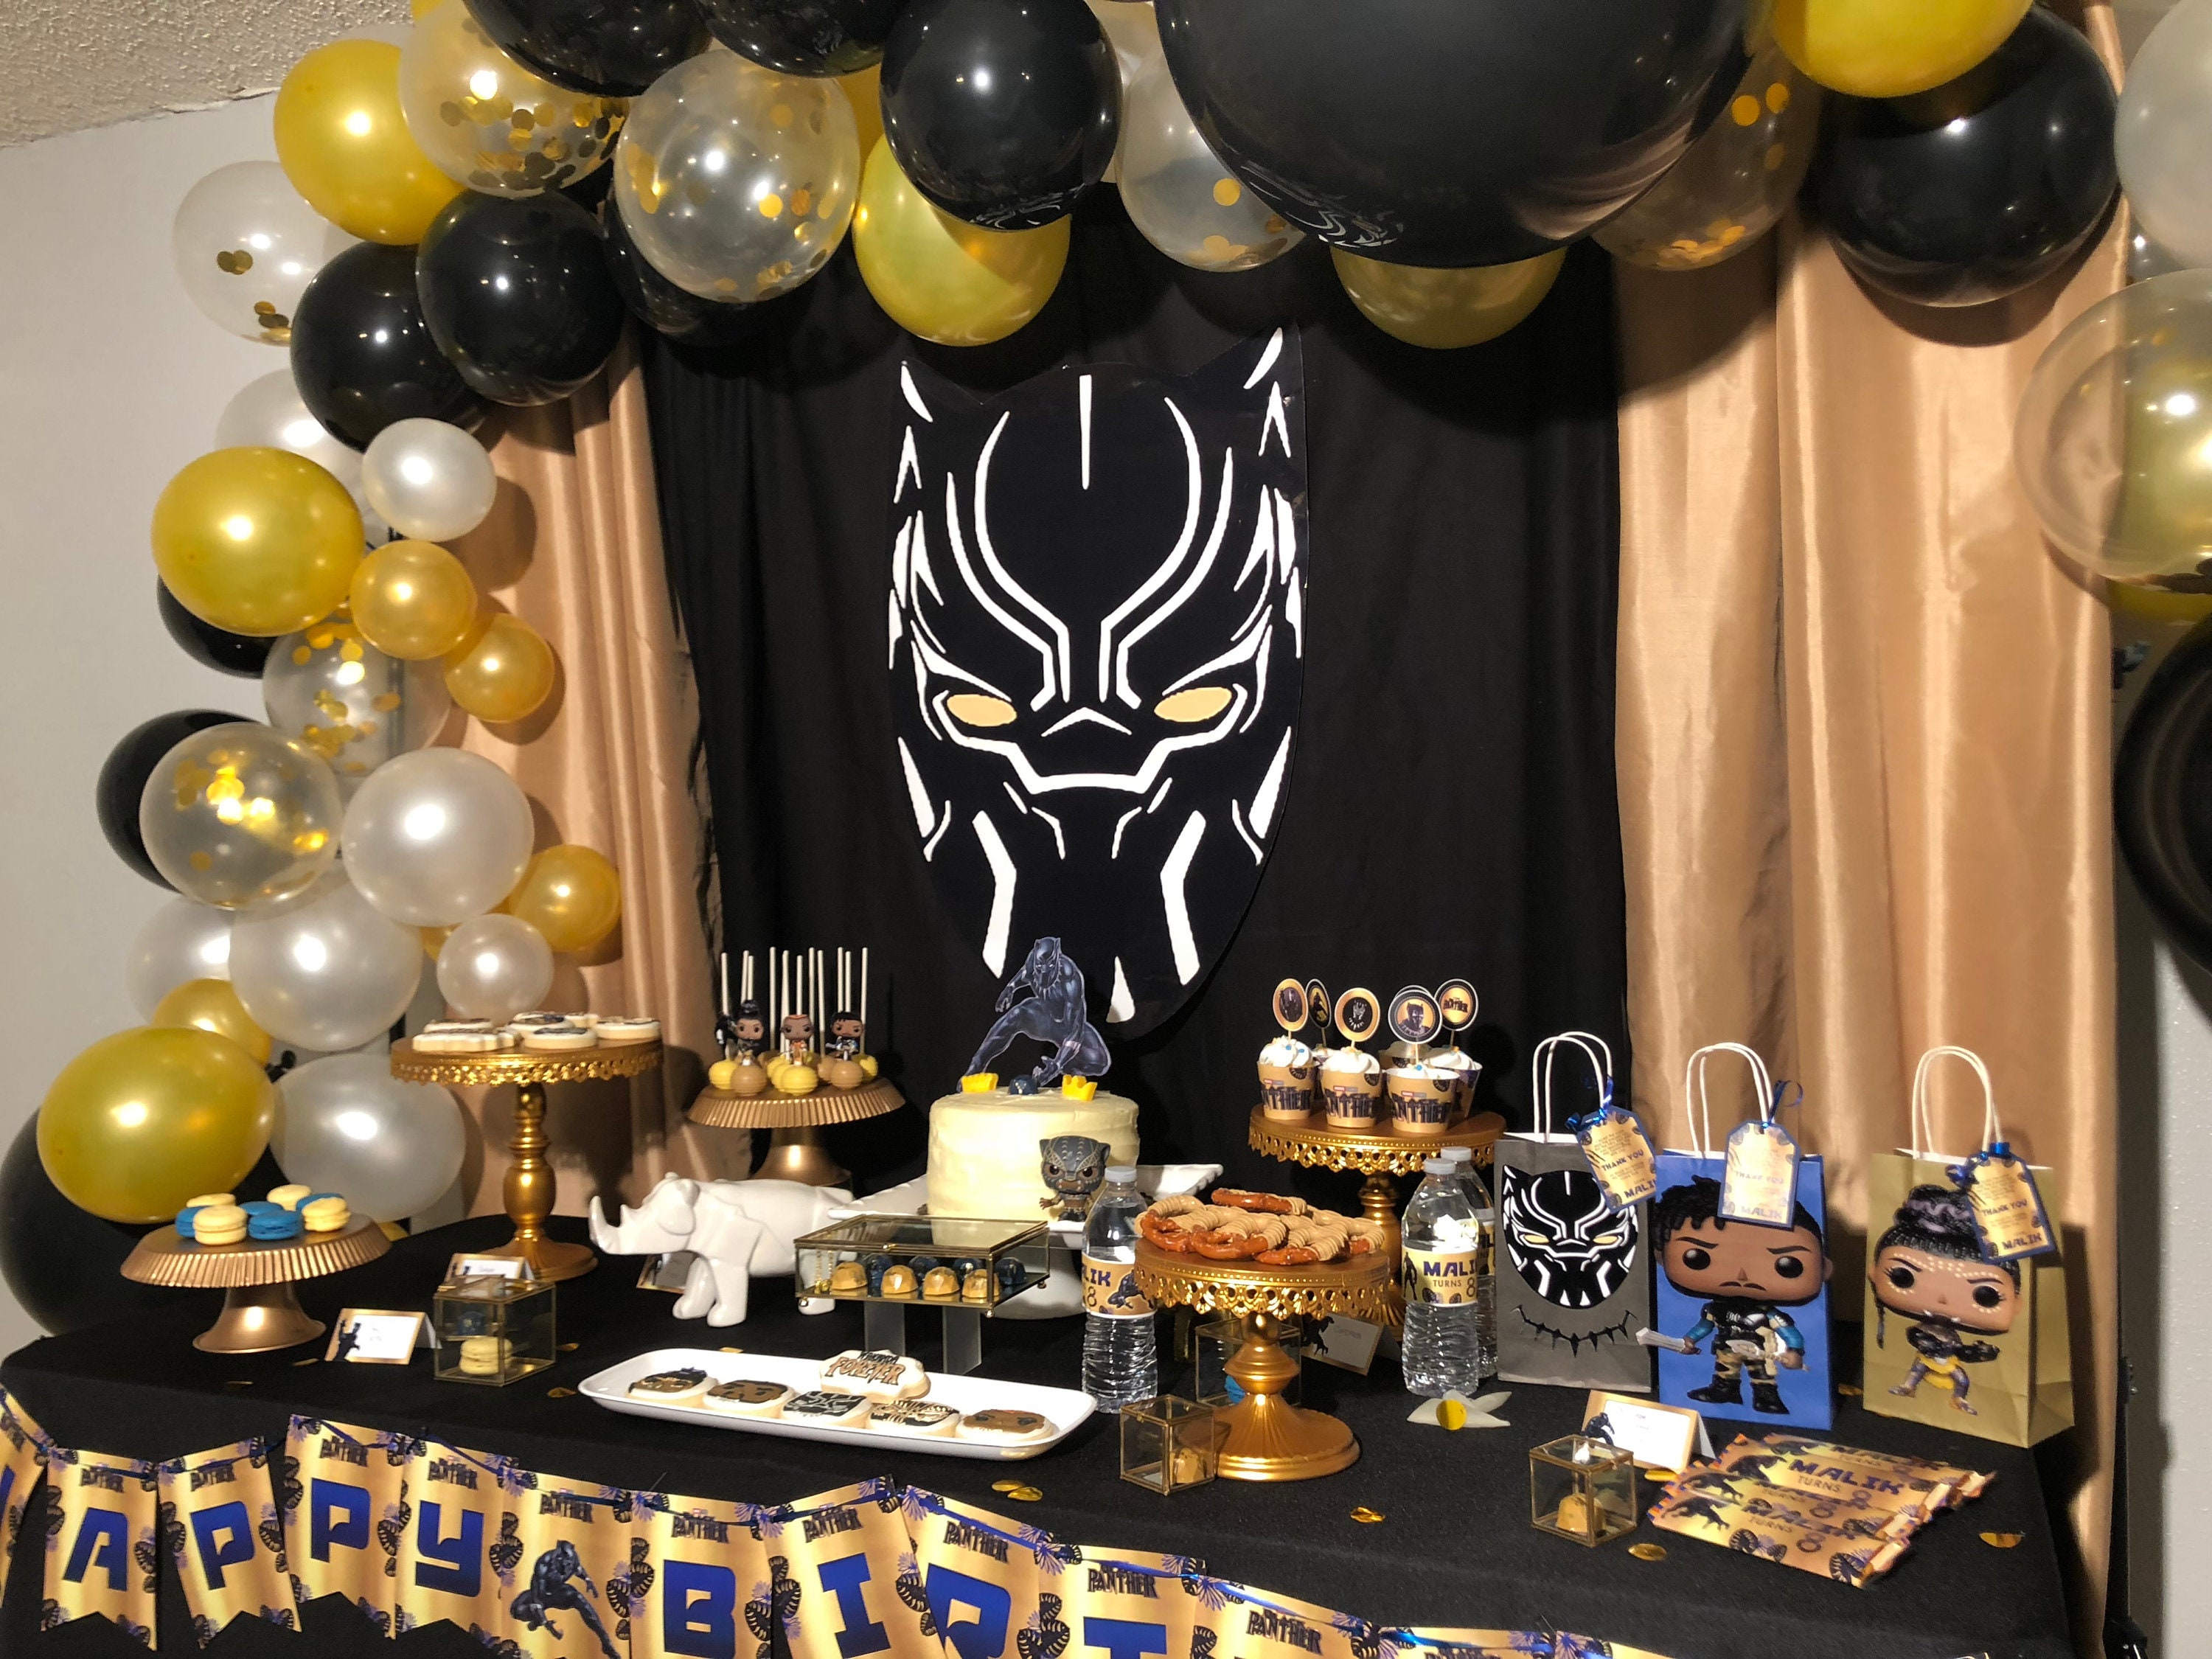 12 Awesome Black Panther Birthday Party Supplies